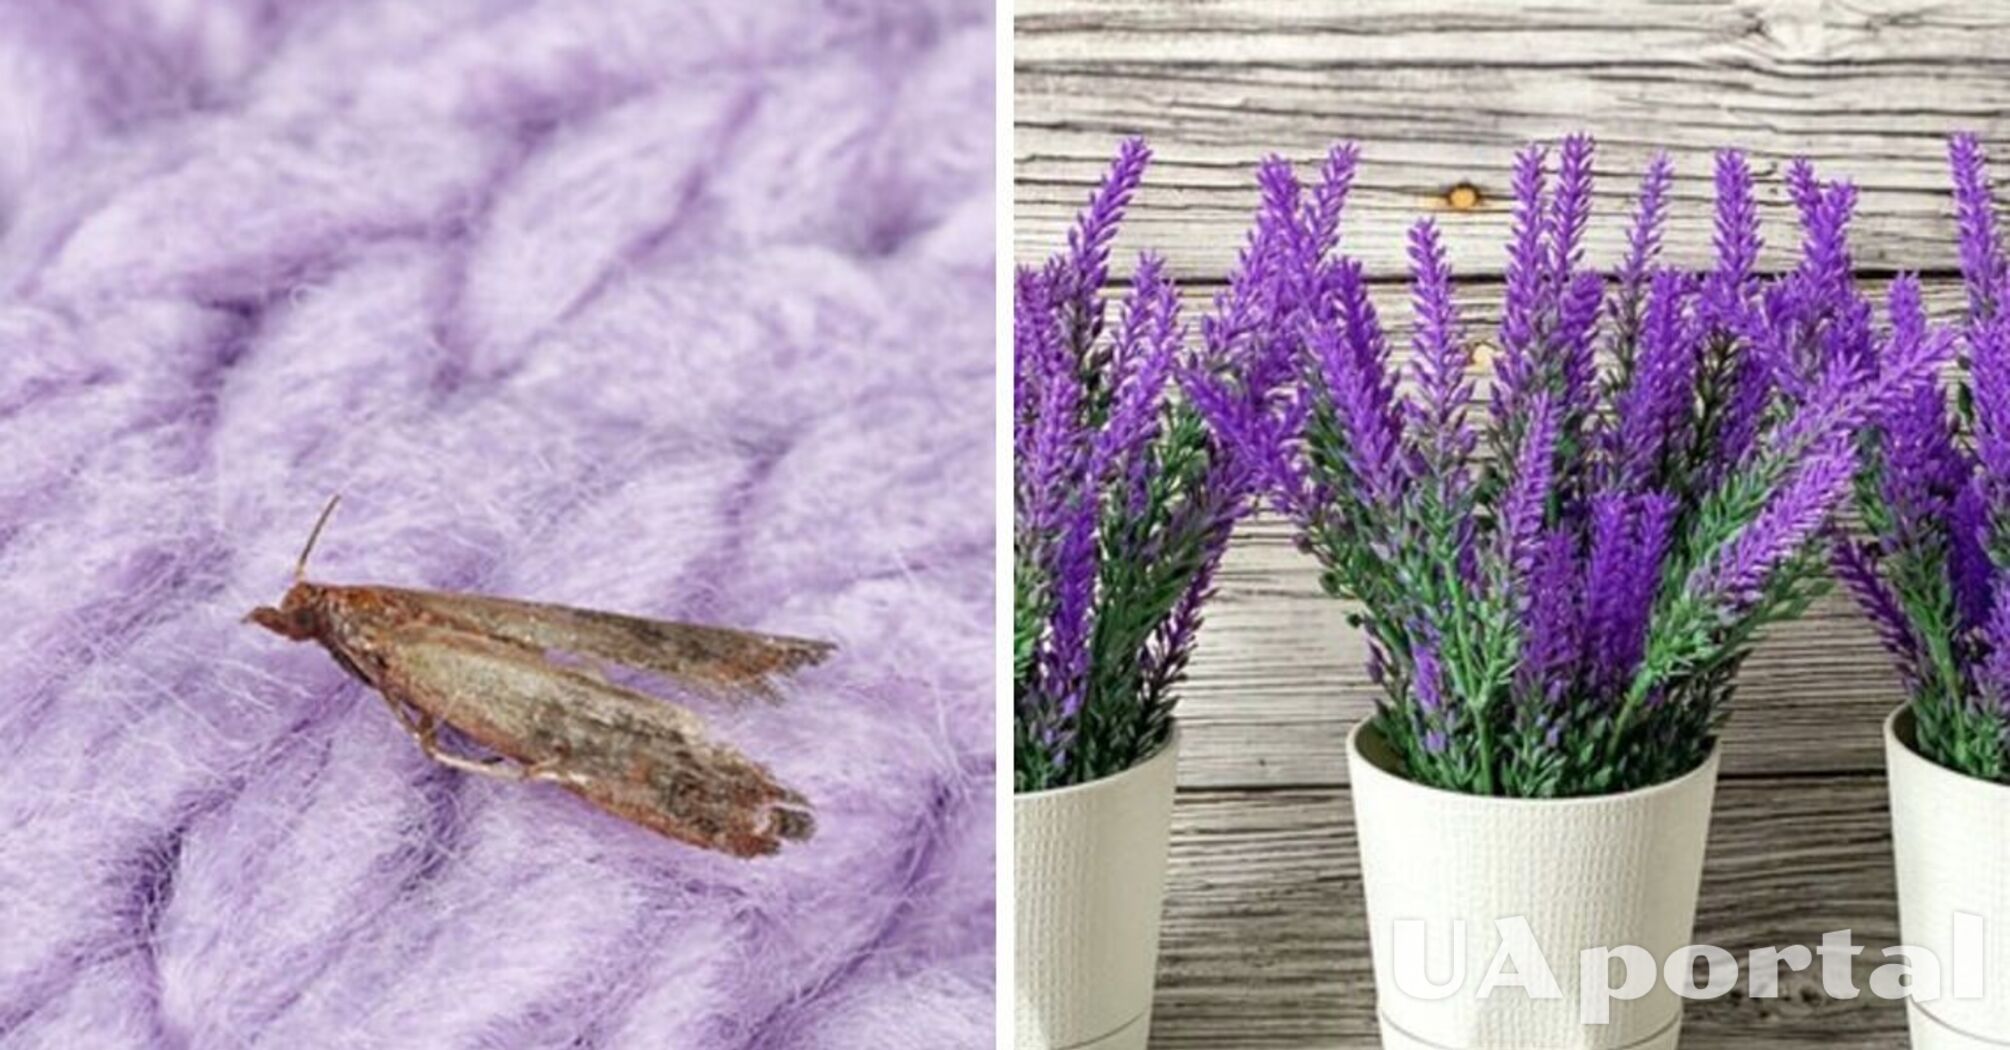 How to get rid of moths: three natural remedies that effectively repel insects